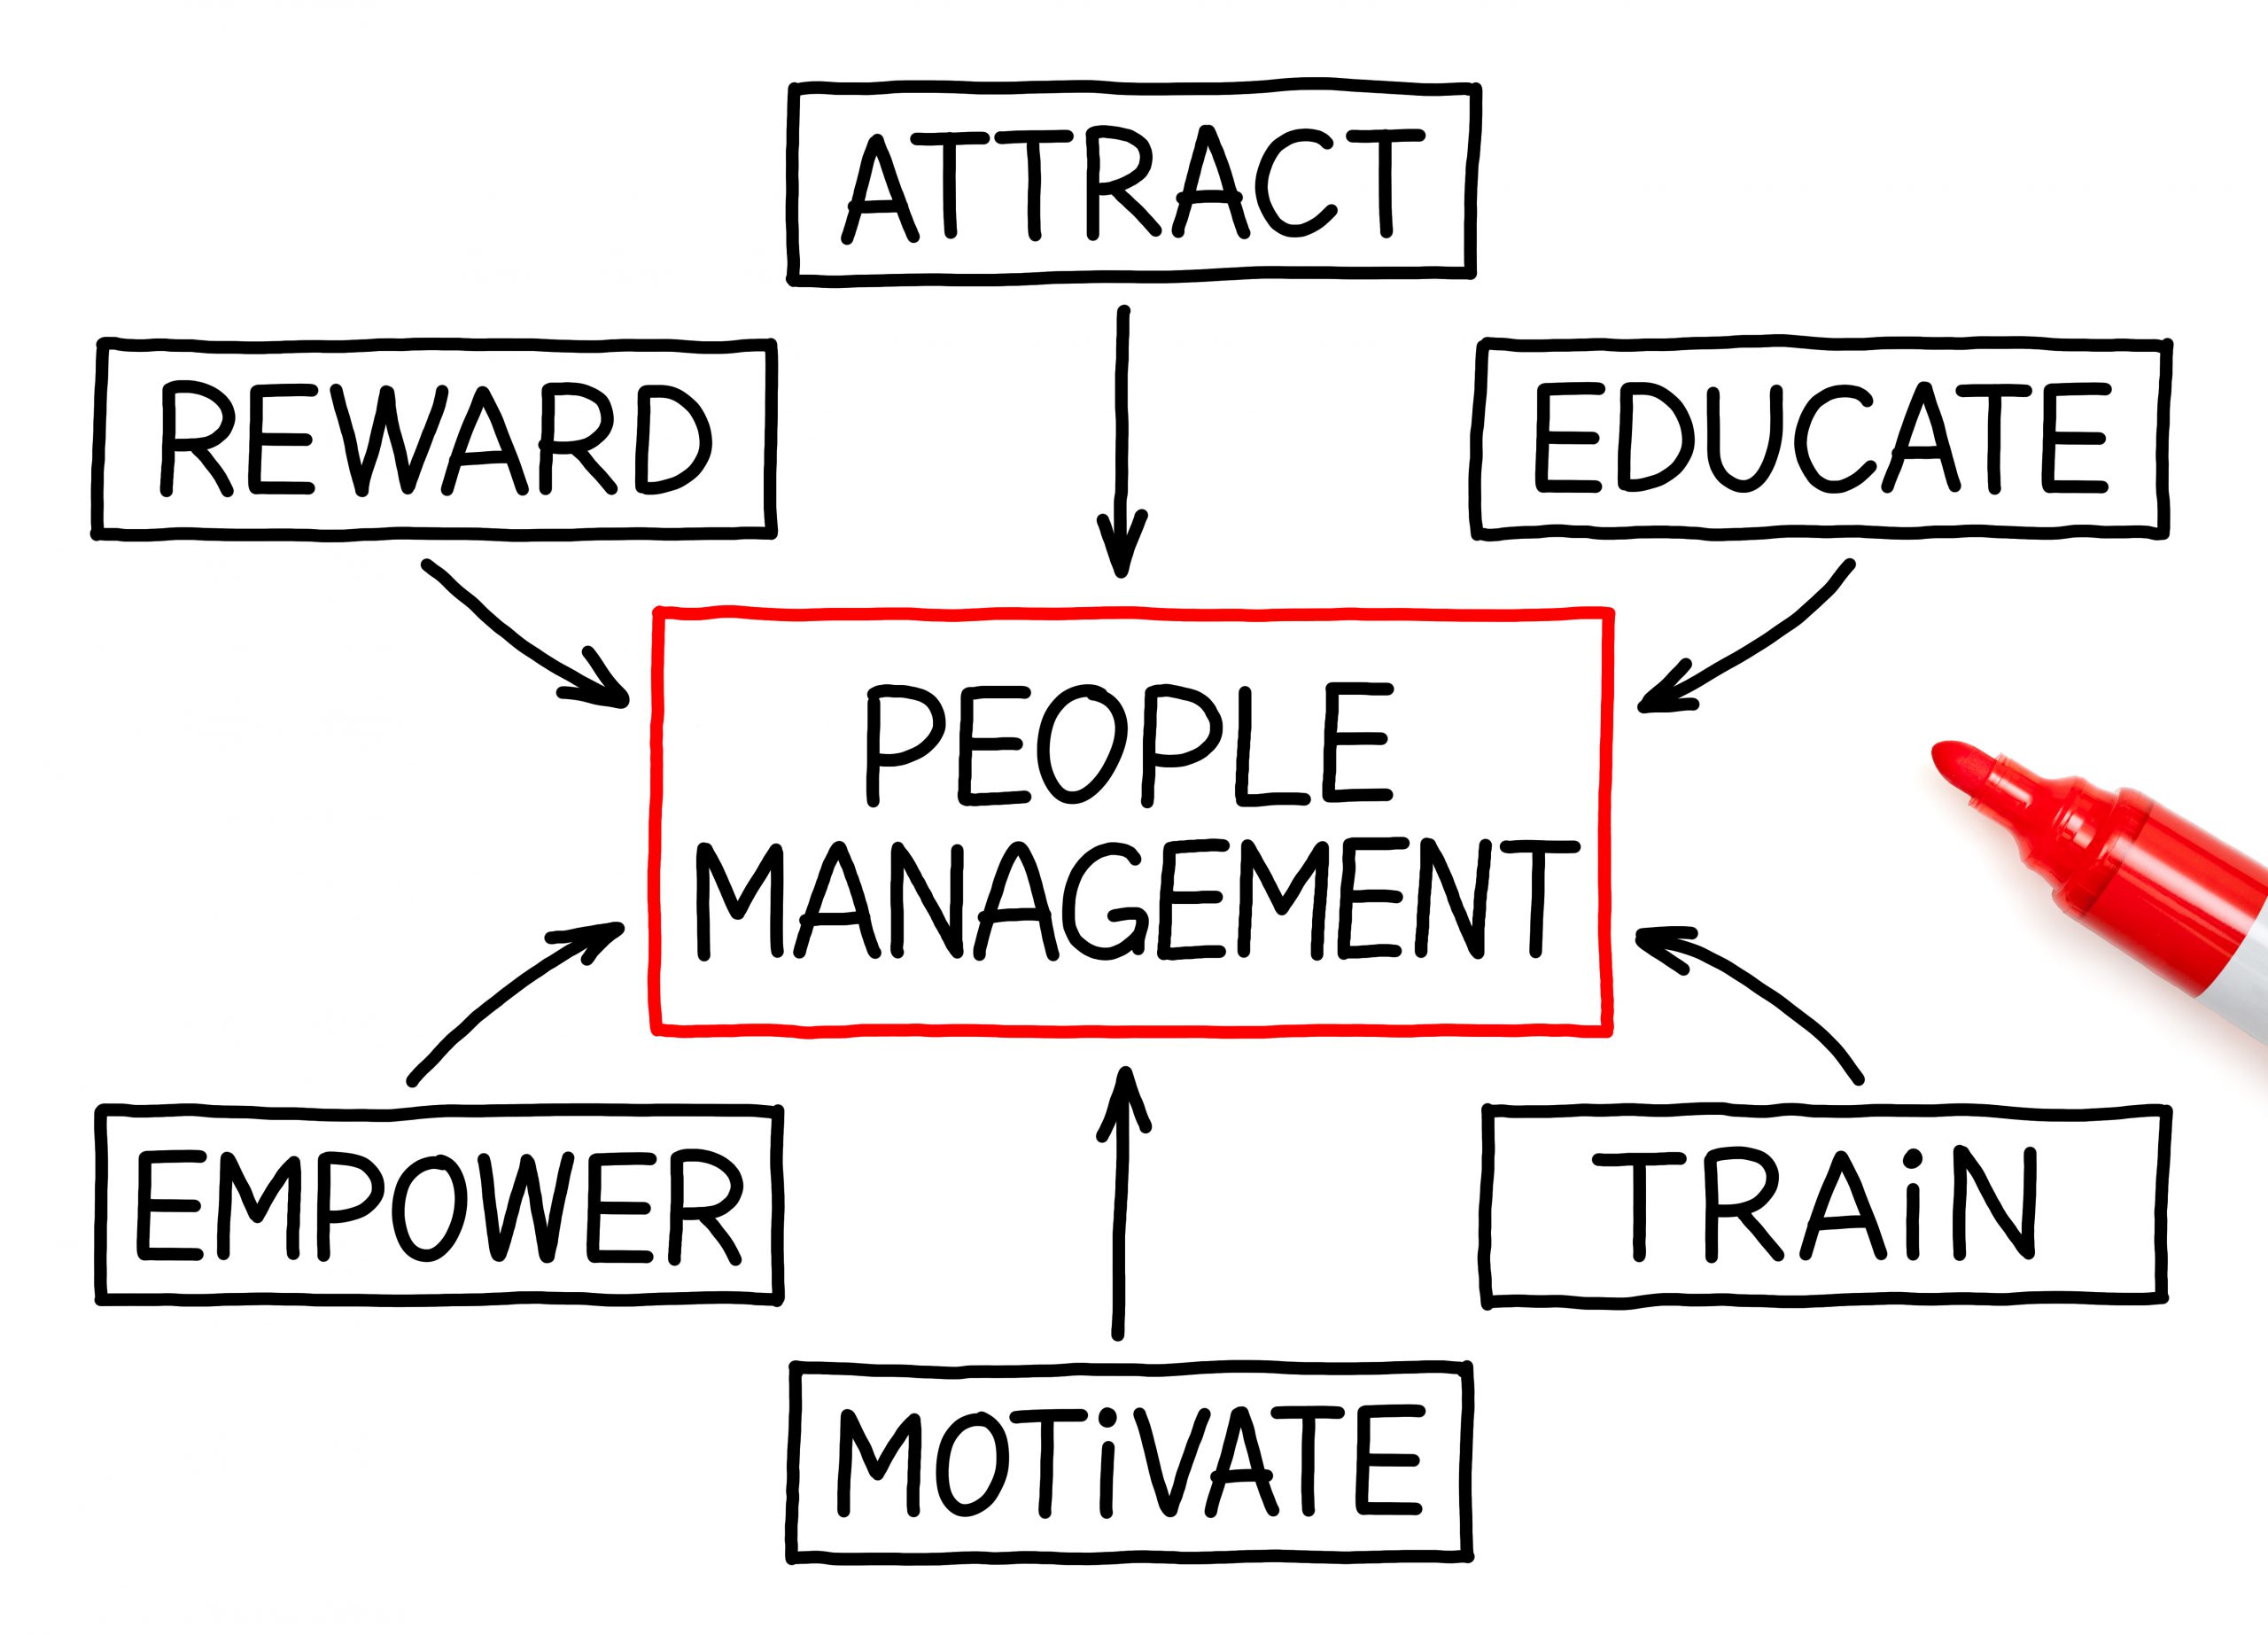 How to manage the employee’s performance?